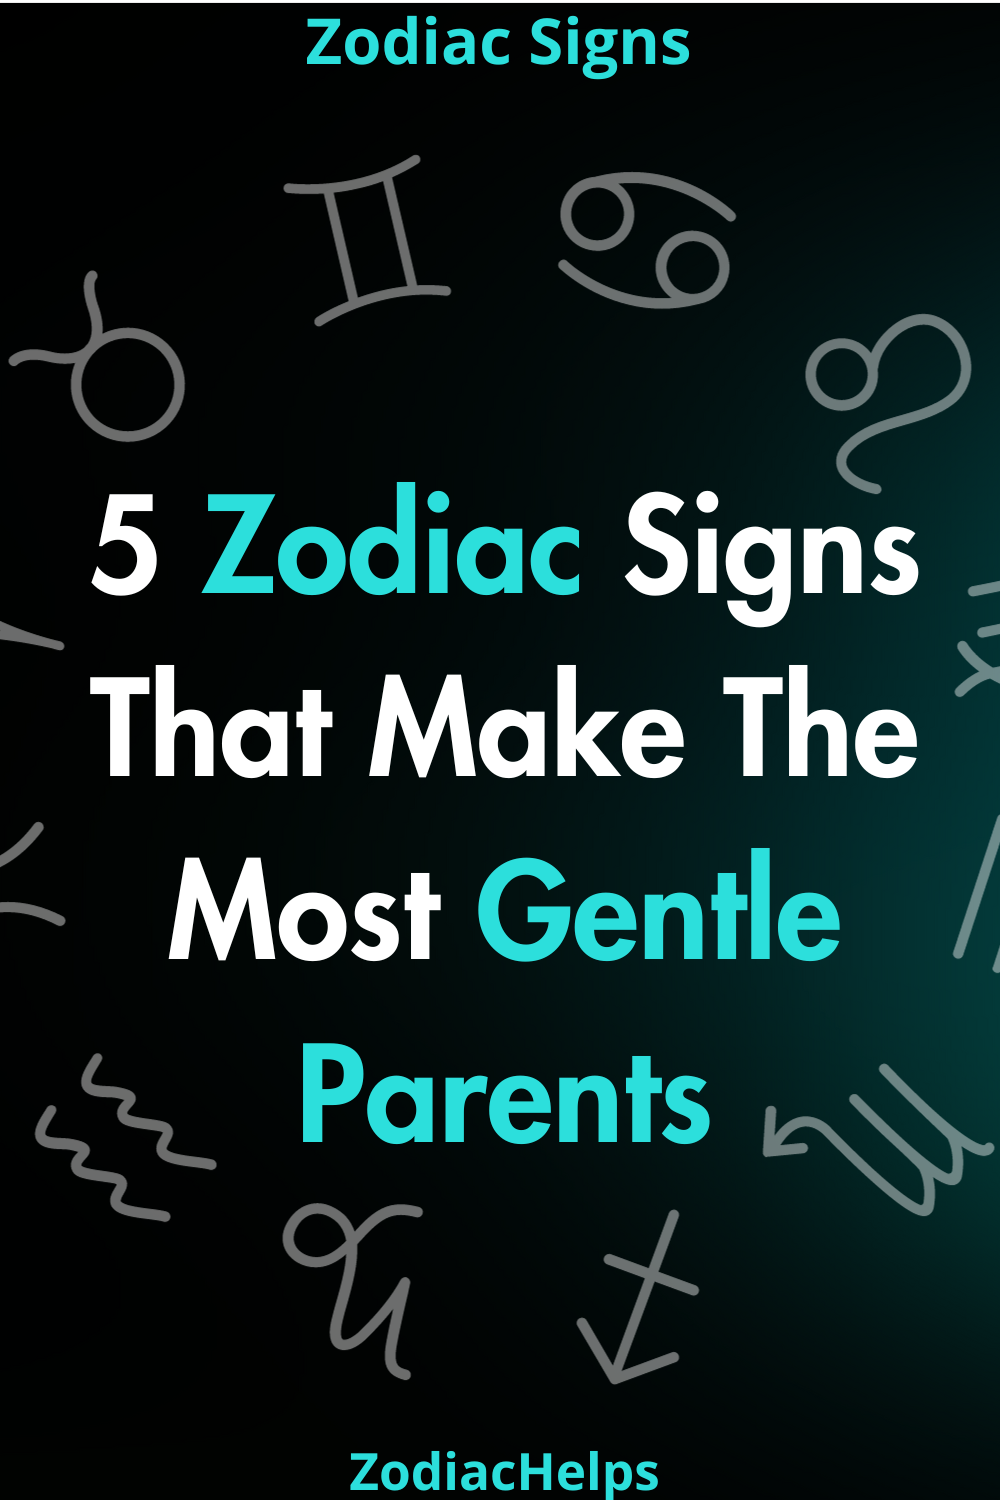 5 Zodiac Signs That Make The Most Gentle Parents